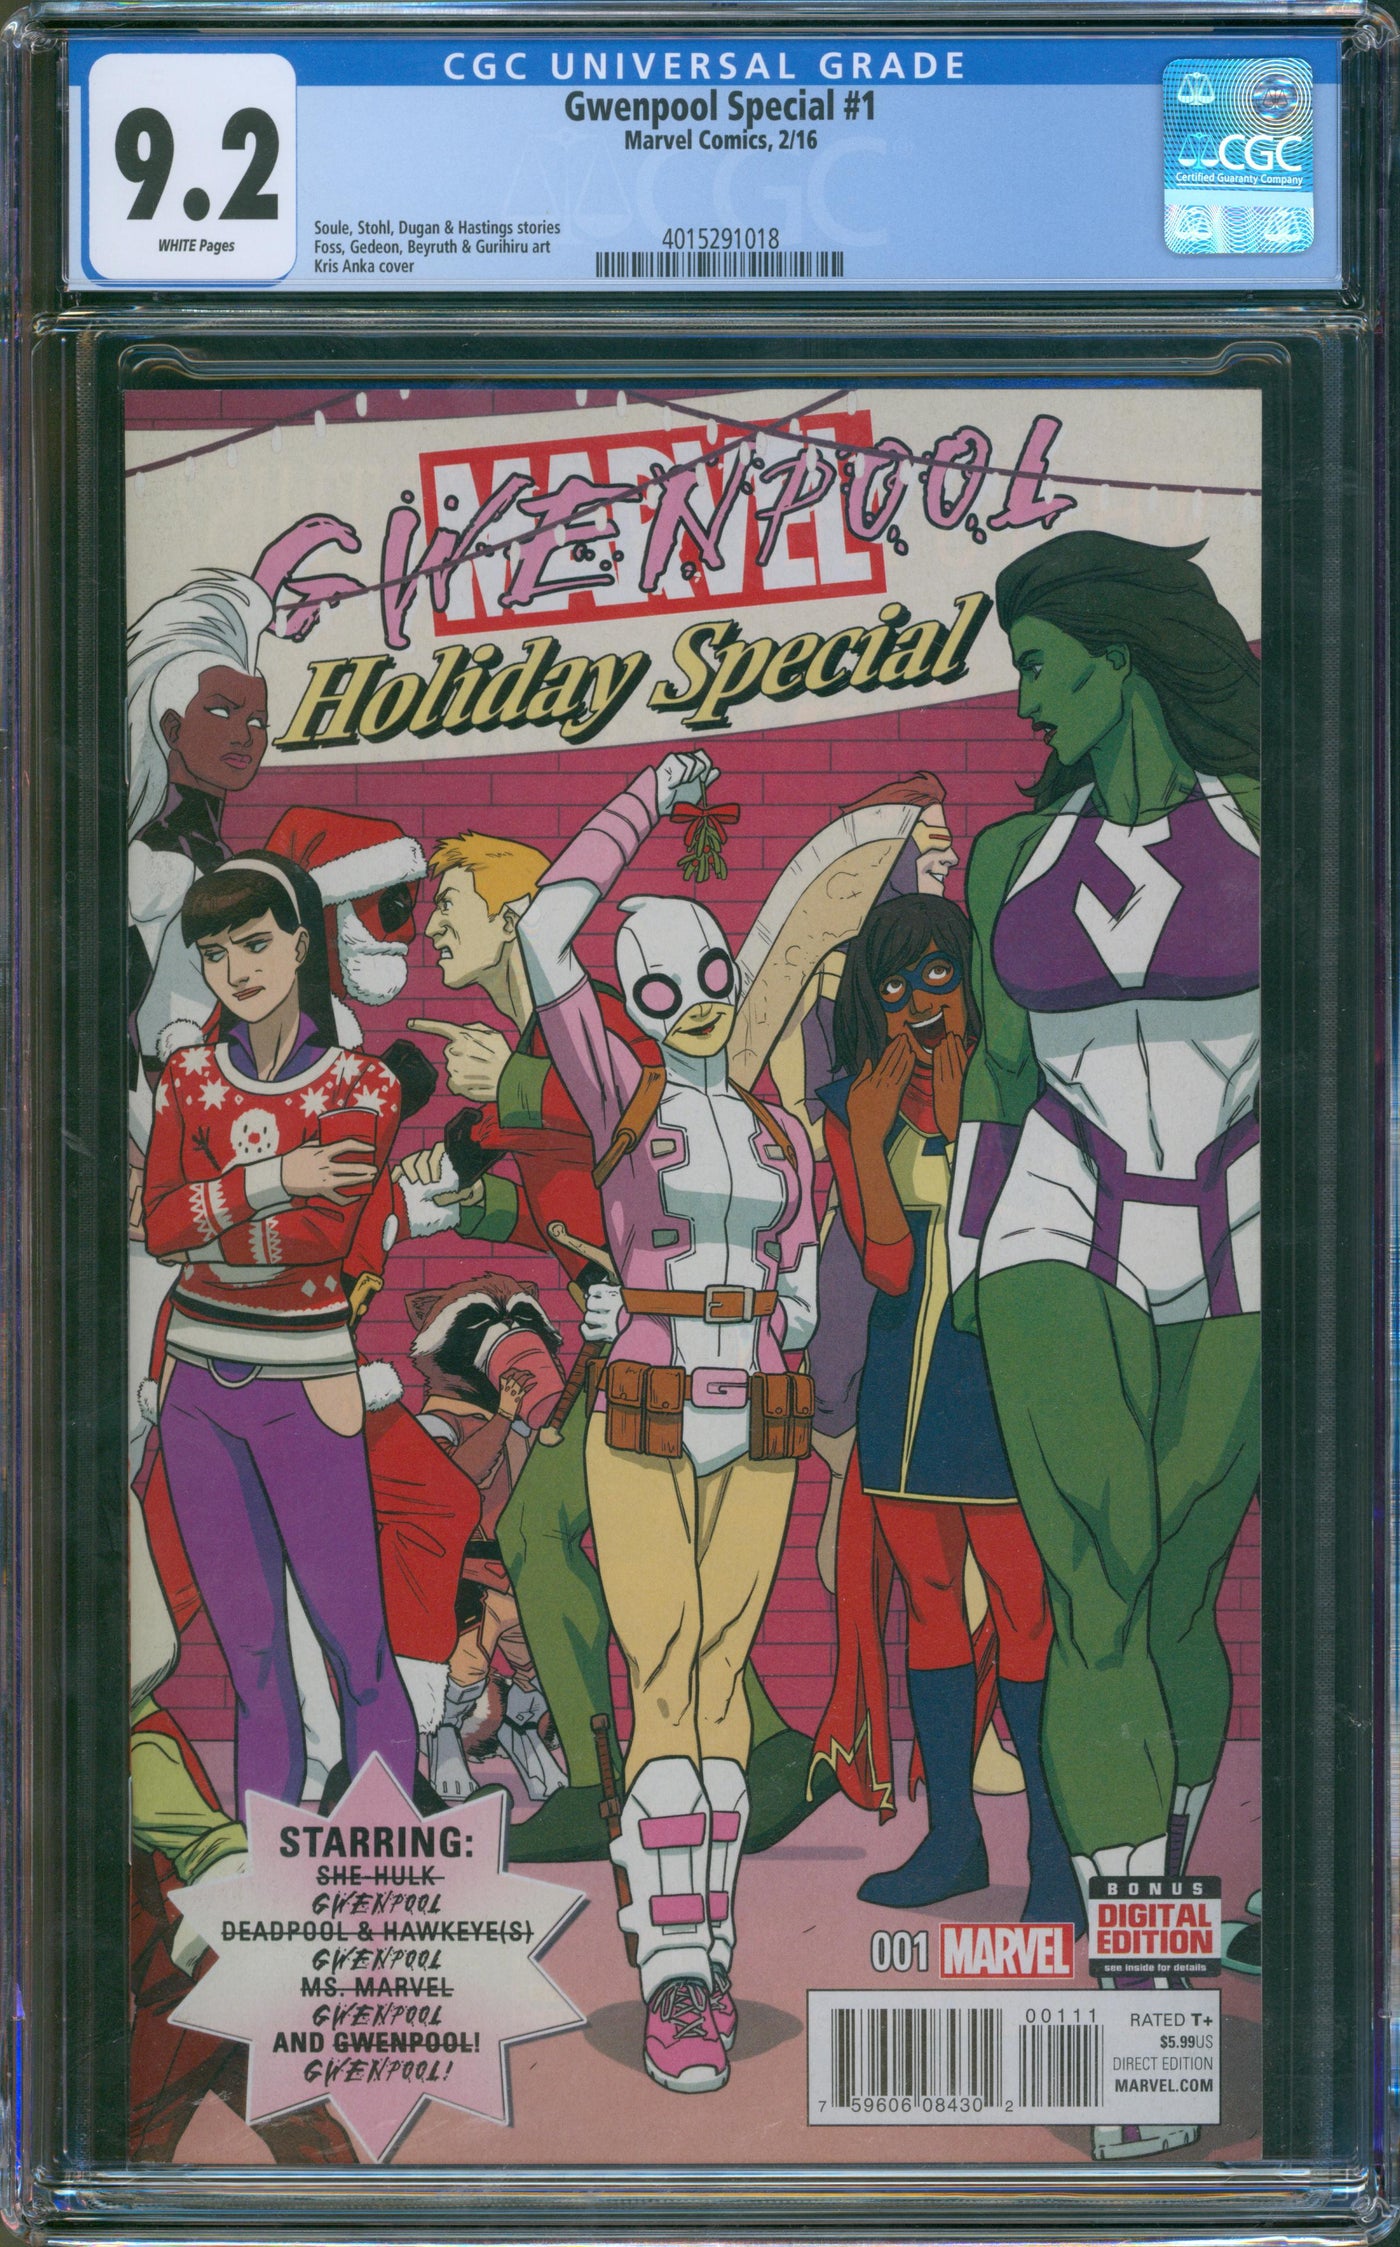 gwenpool holiday special #1 CGC 9.2